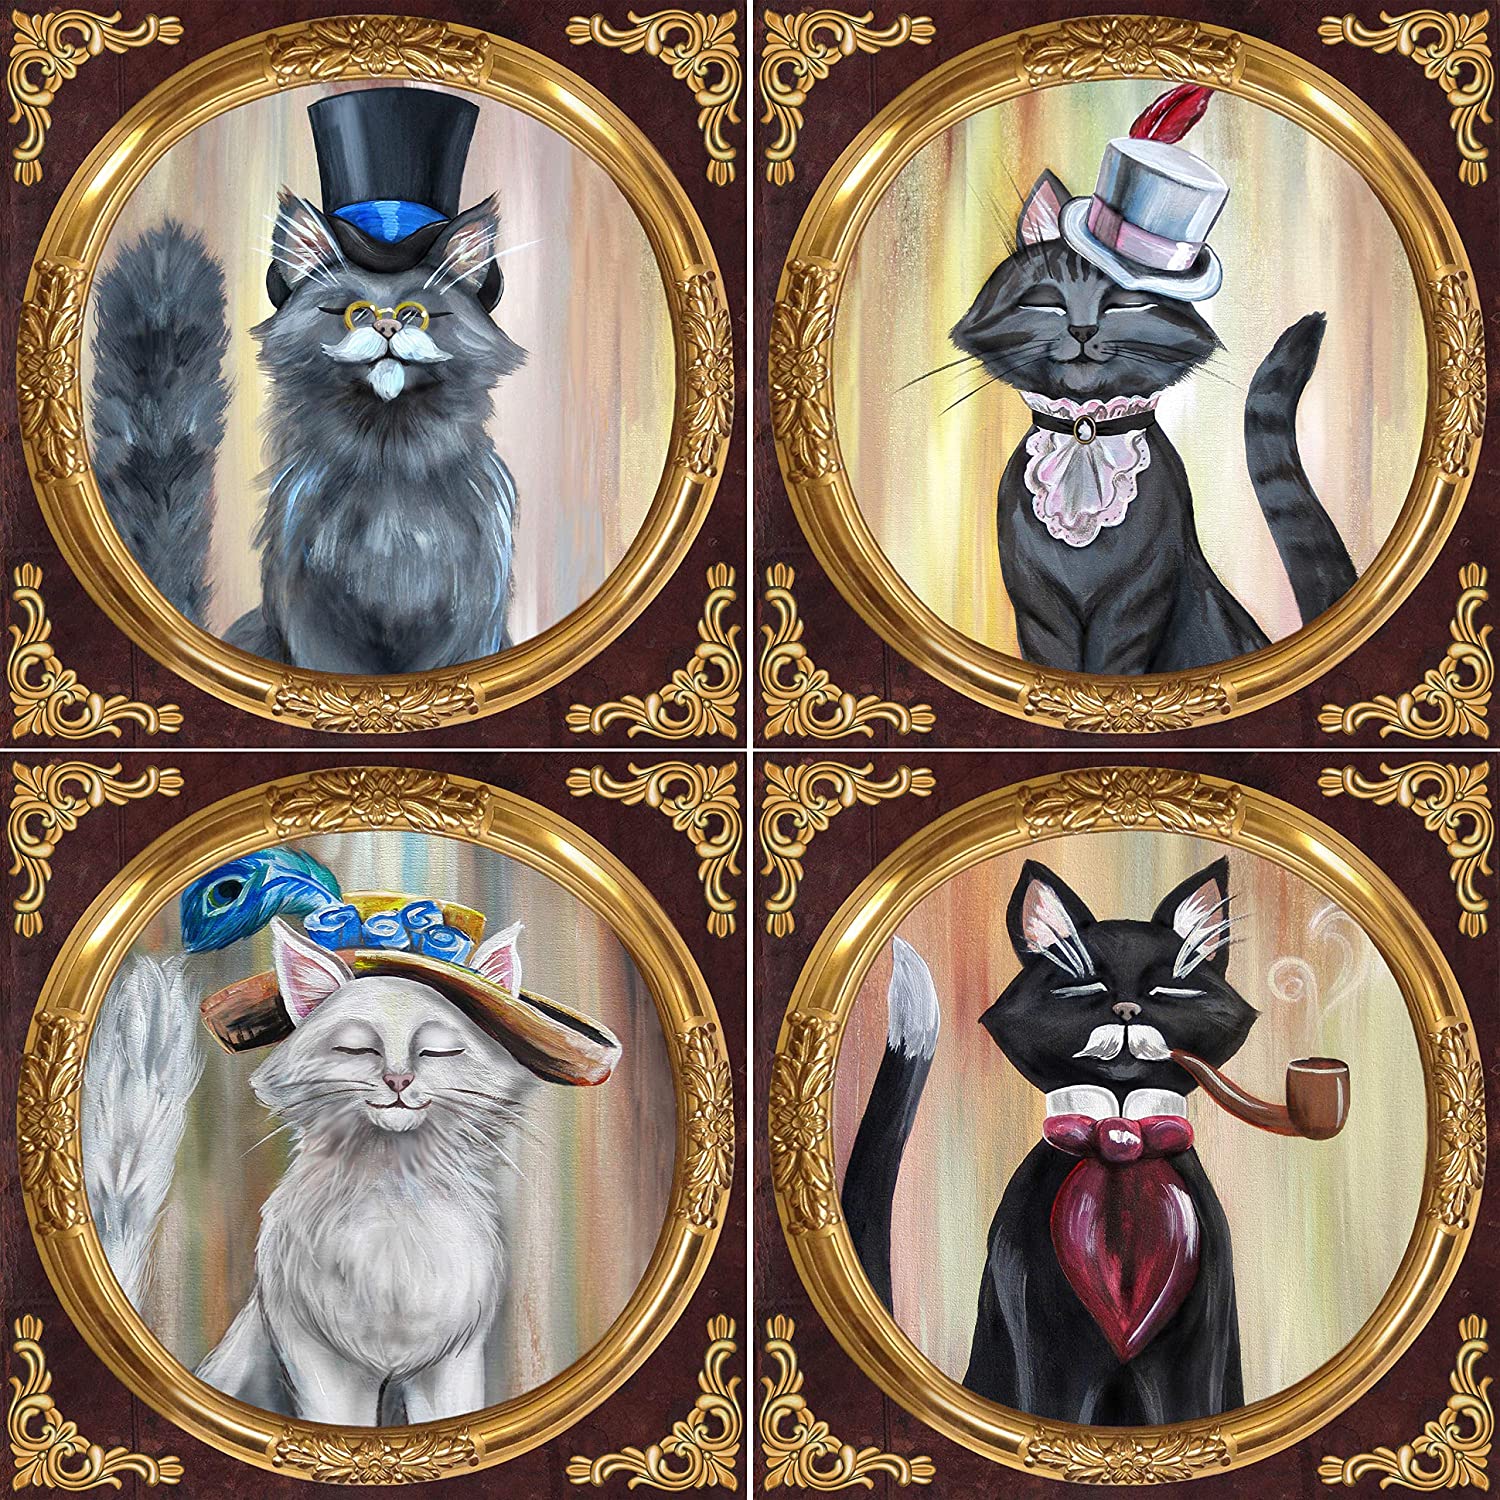 DWK Fancy Felines Victorican Cat Drink Coasters Assorted (4 Piece Set) | Cat Decor for Your Living Room Coffee Table | Classy Cat Coasters | Coffee Bar Accessories - 4"